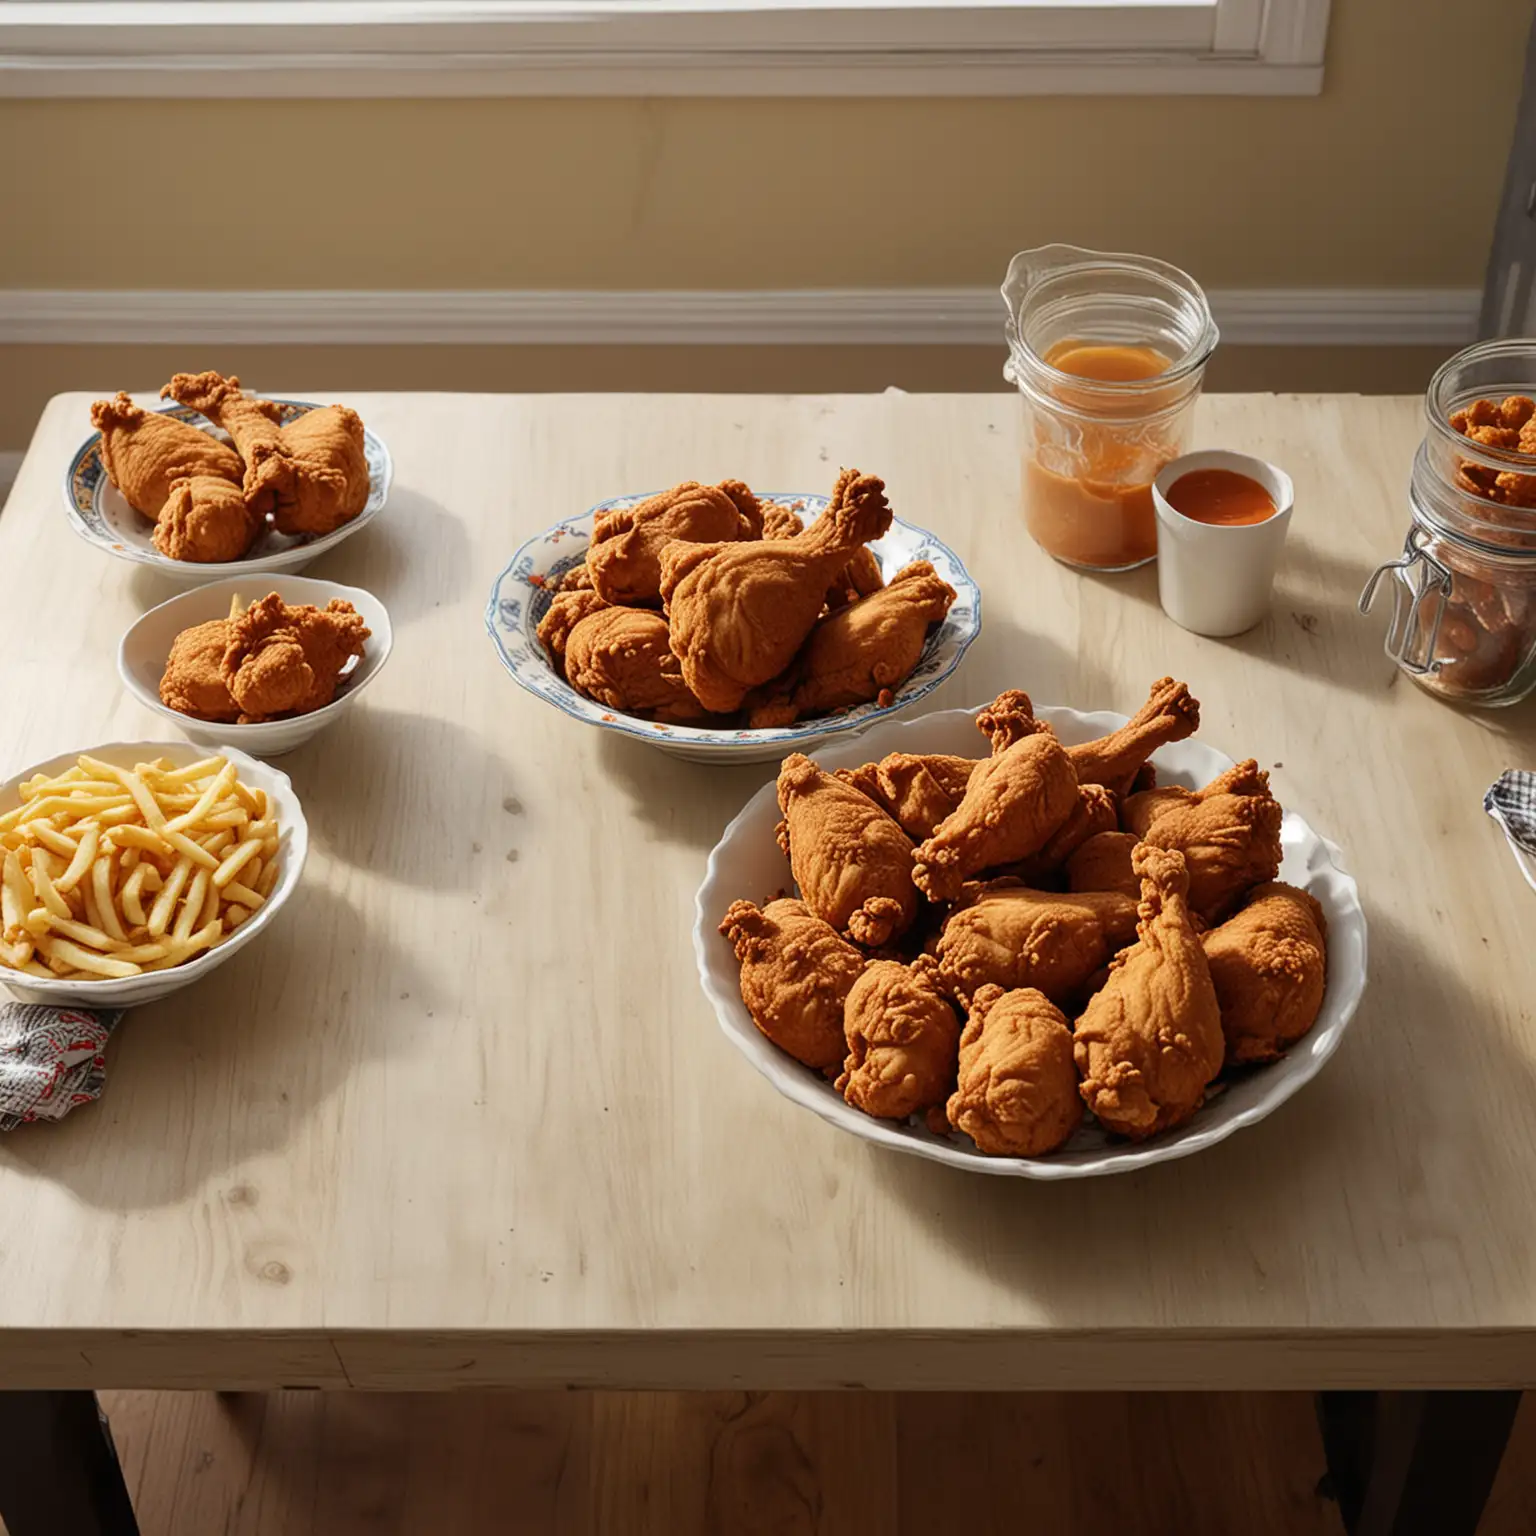 generate an image of a kitchen table with a bowl of fried chicken on it